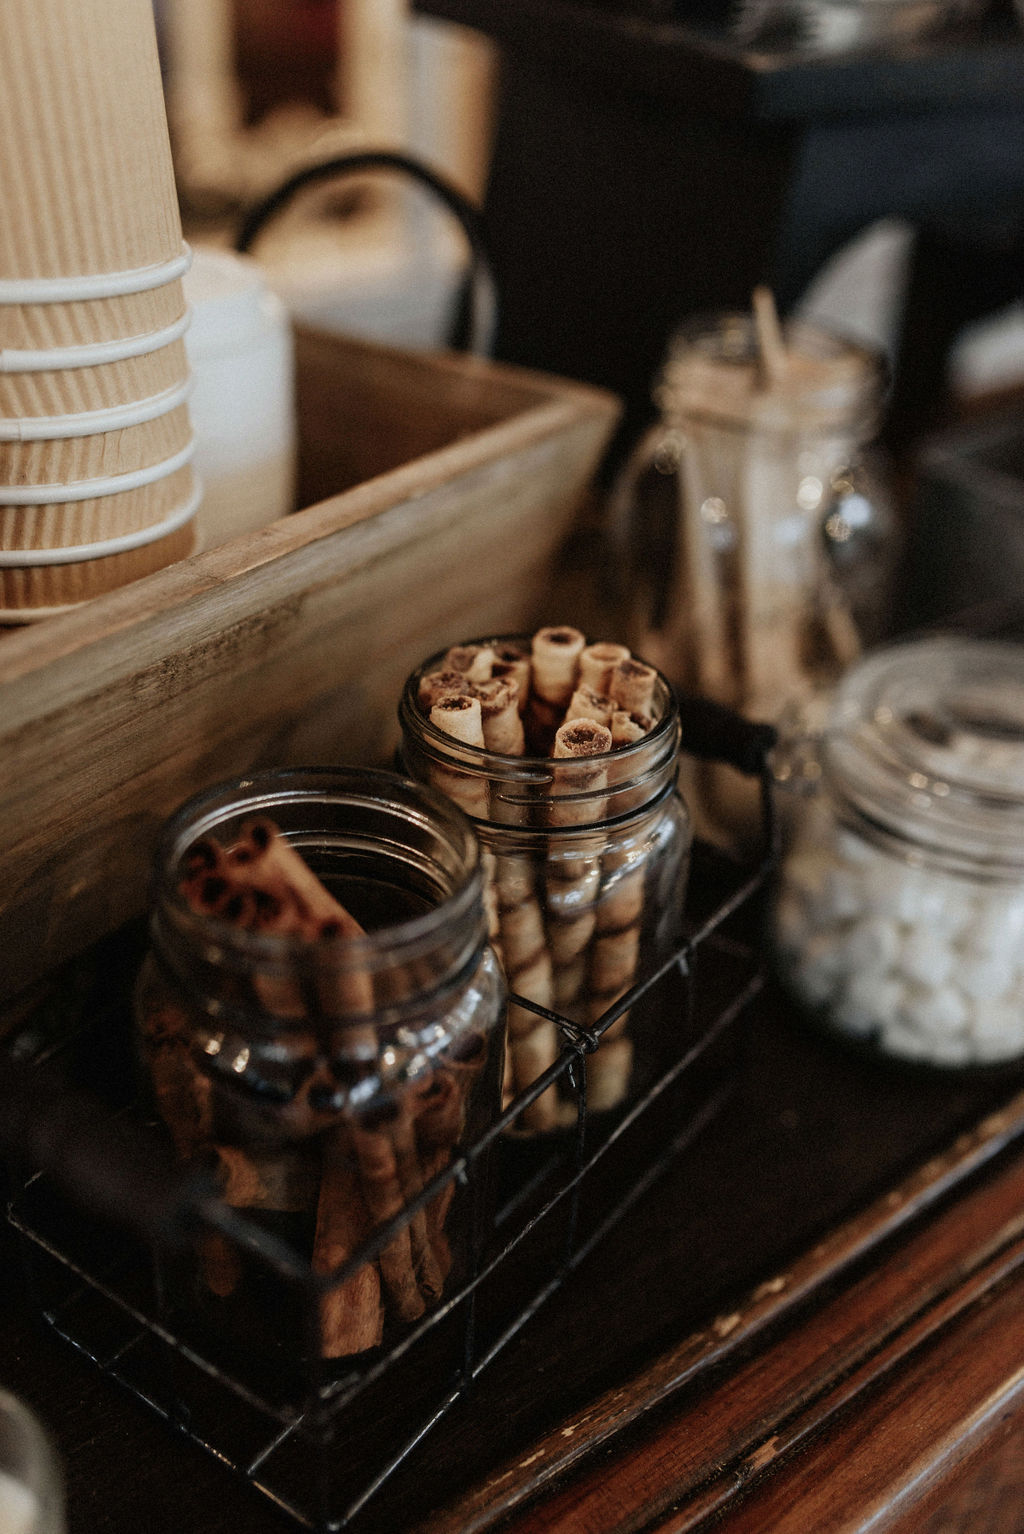 Hot cocoa wedding bar: Magical Winter Wedding by Meghan Melia Photography featured on Nashville Bride Guide!